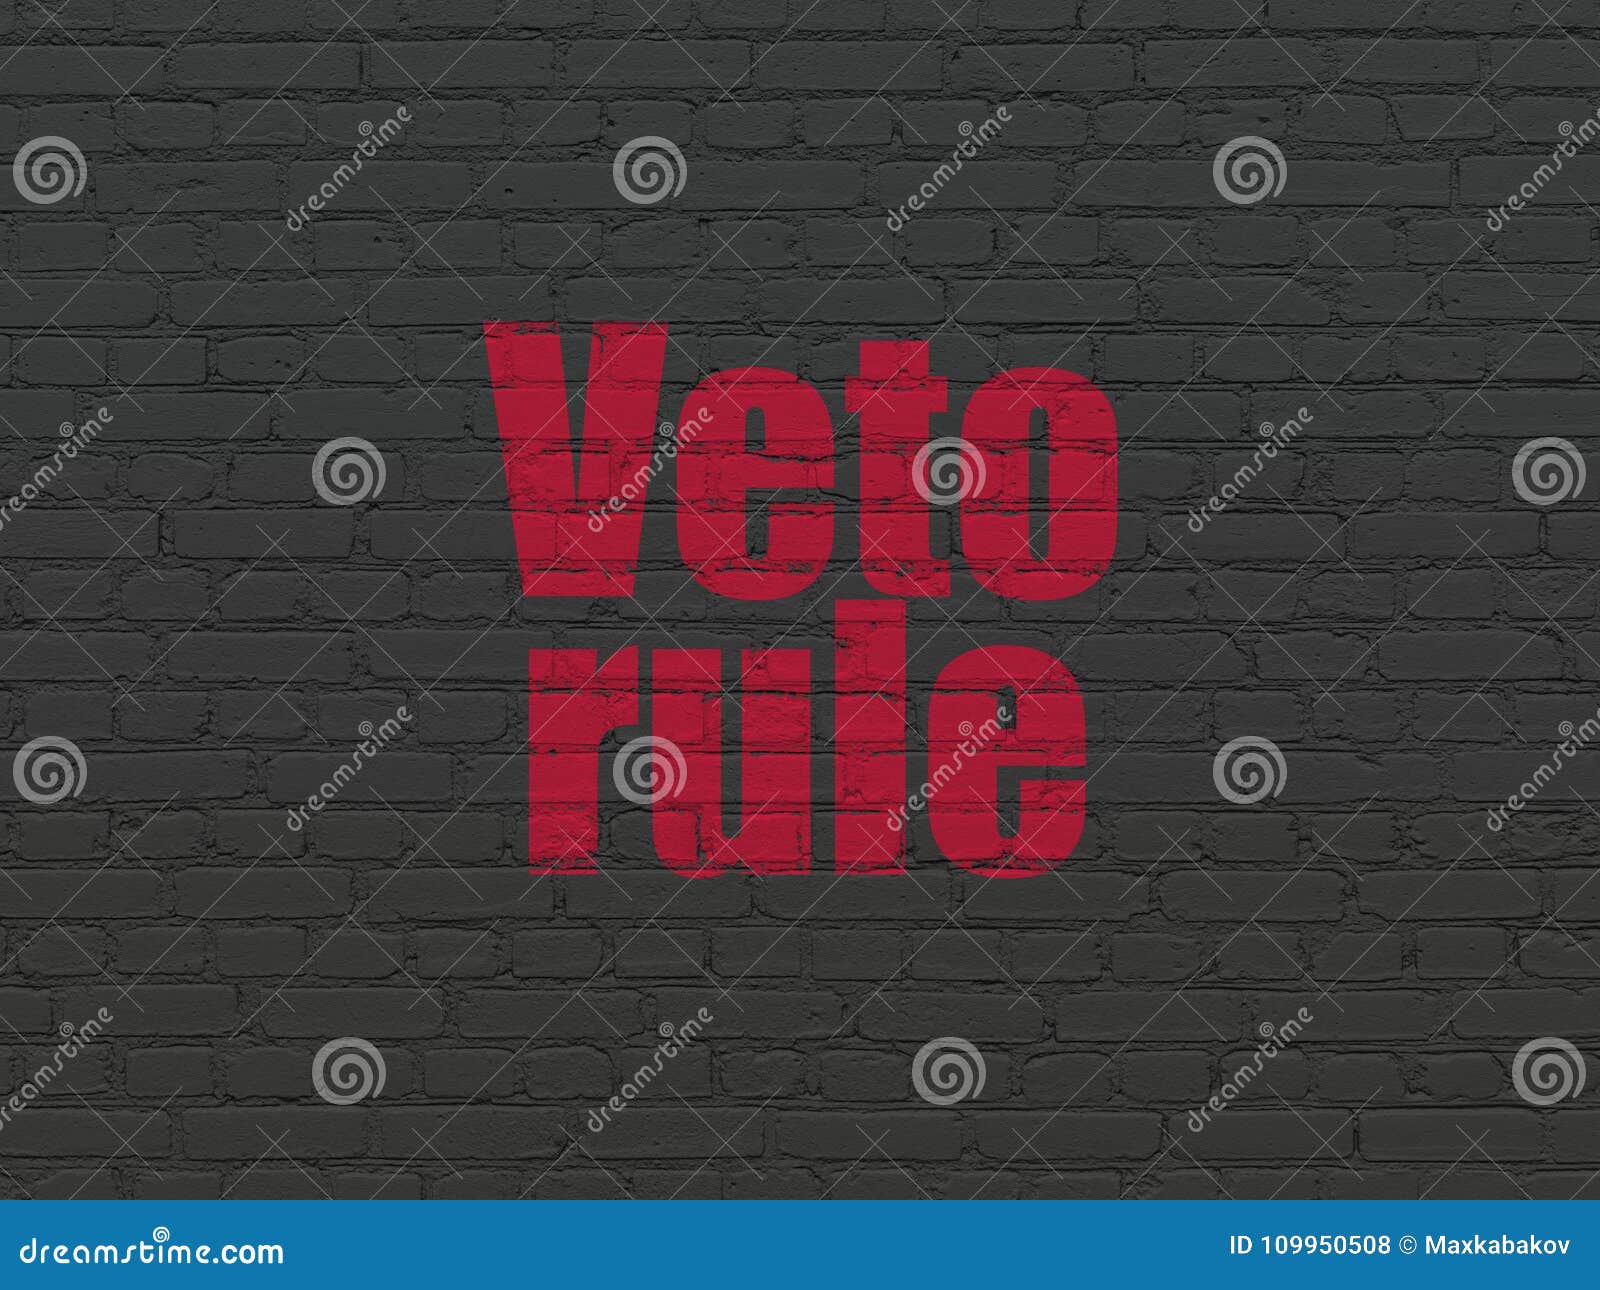 political concept: veto rule on wall background